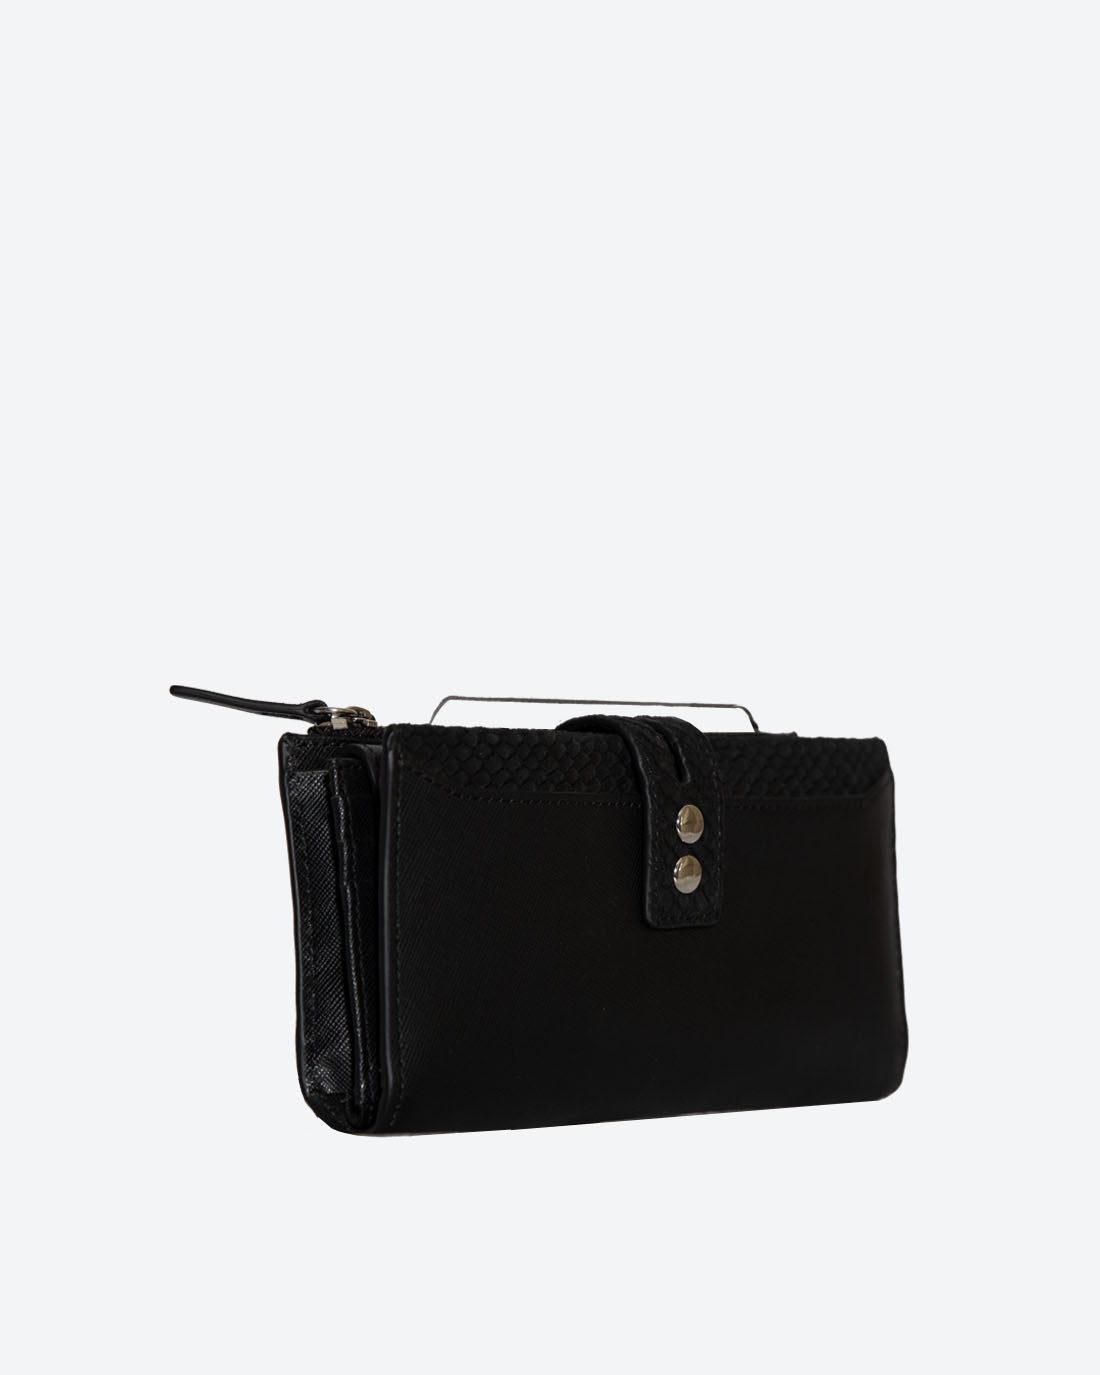 PITA: Multi-Sections Leather Clutch/ Wallet